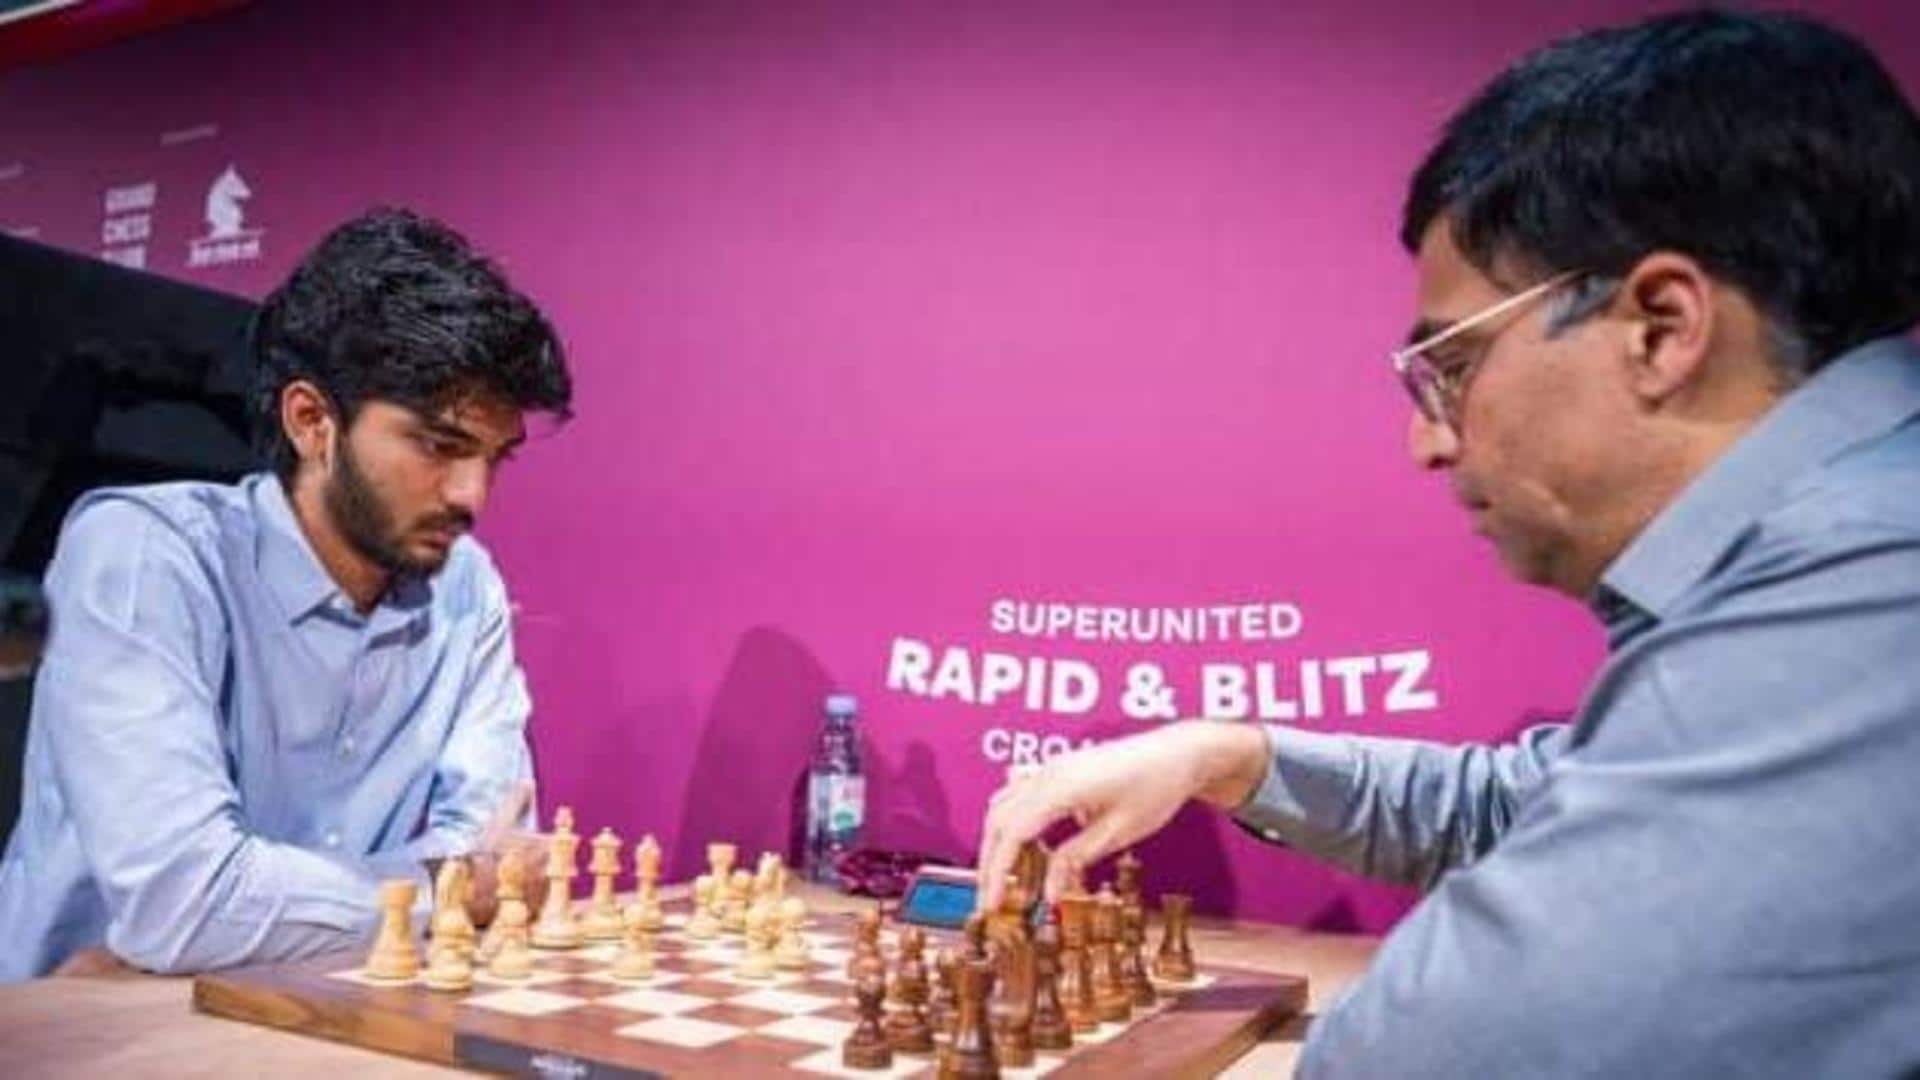 Gukesh displaces Viswanathan Anand to become India's top-ranked chess player